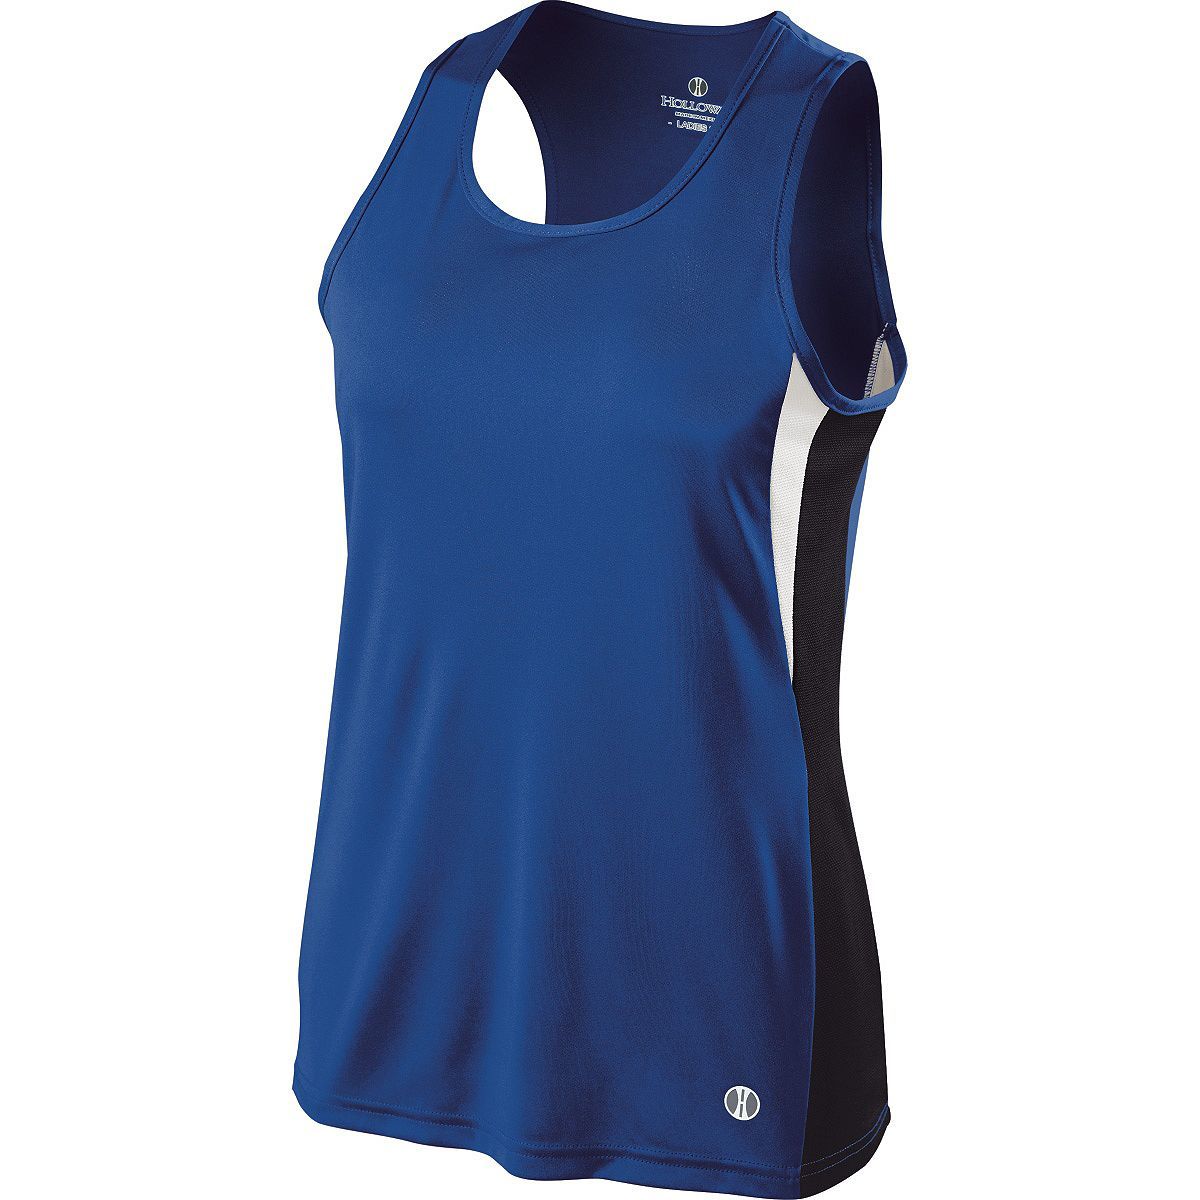 Holloway Ladies Vertical Singlet in Royal/Black/White  -Part of the Ladies, Track-Field, Holloway, Shirts product lines at KanaleyCreations.com